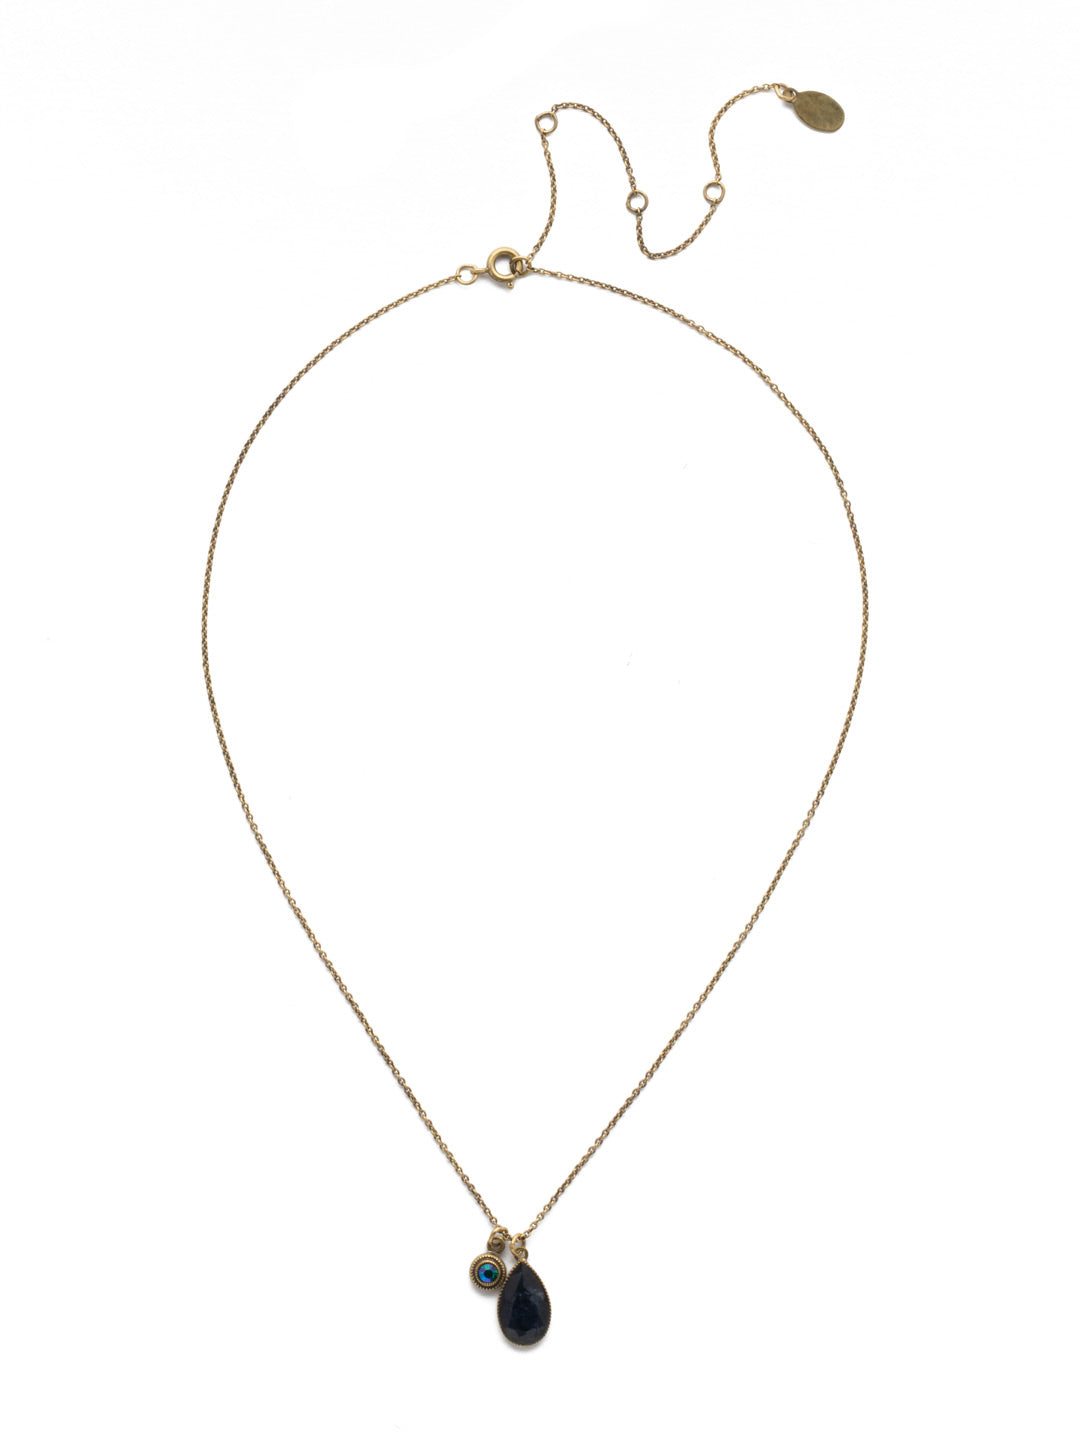 Jamie Pendant Necklace Pendant Necklace - NEF17AGGOT - Simple and stunning are two words you could use to describe this glistening teardrop pendant that sits on a dainty chain link necklace.This necklace is also a perfect layering piece and can be paired with any other necklace you choose. From Sorrelli's Game of Jewel Tones collection in our Antique Gold-tone finish.